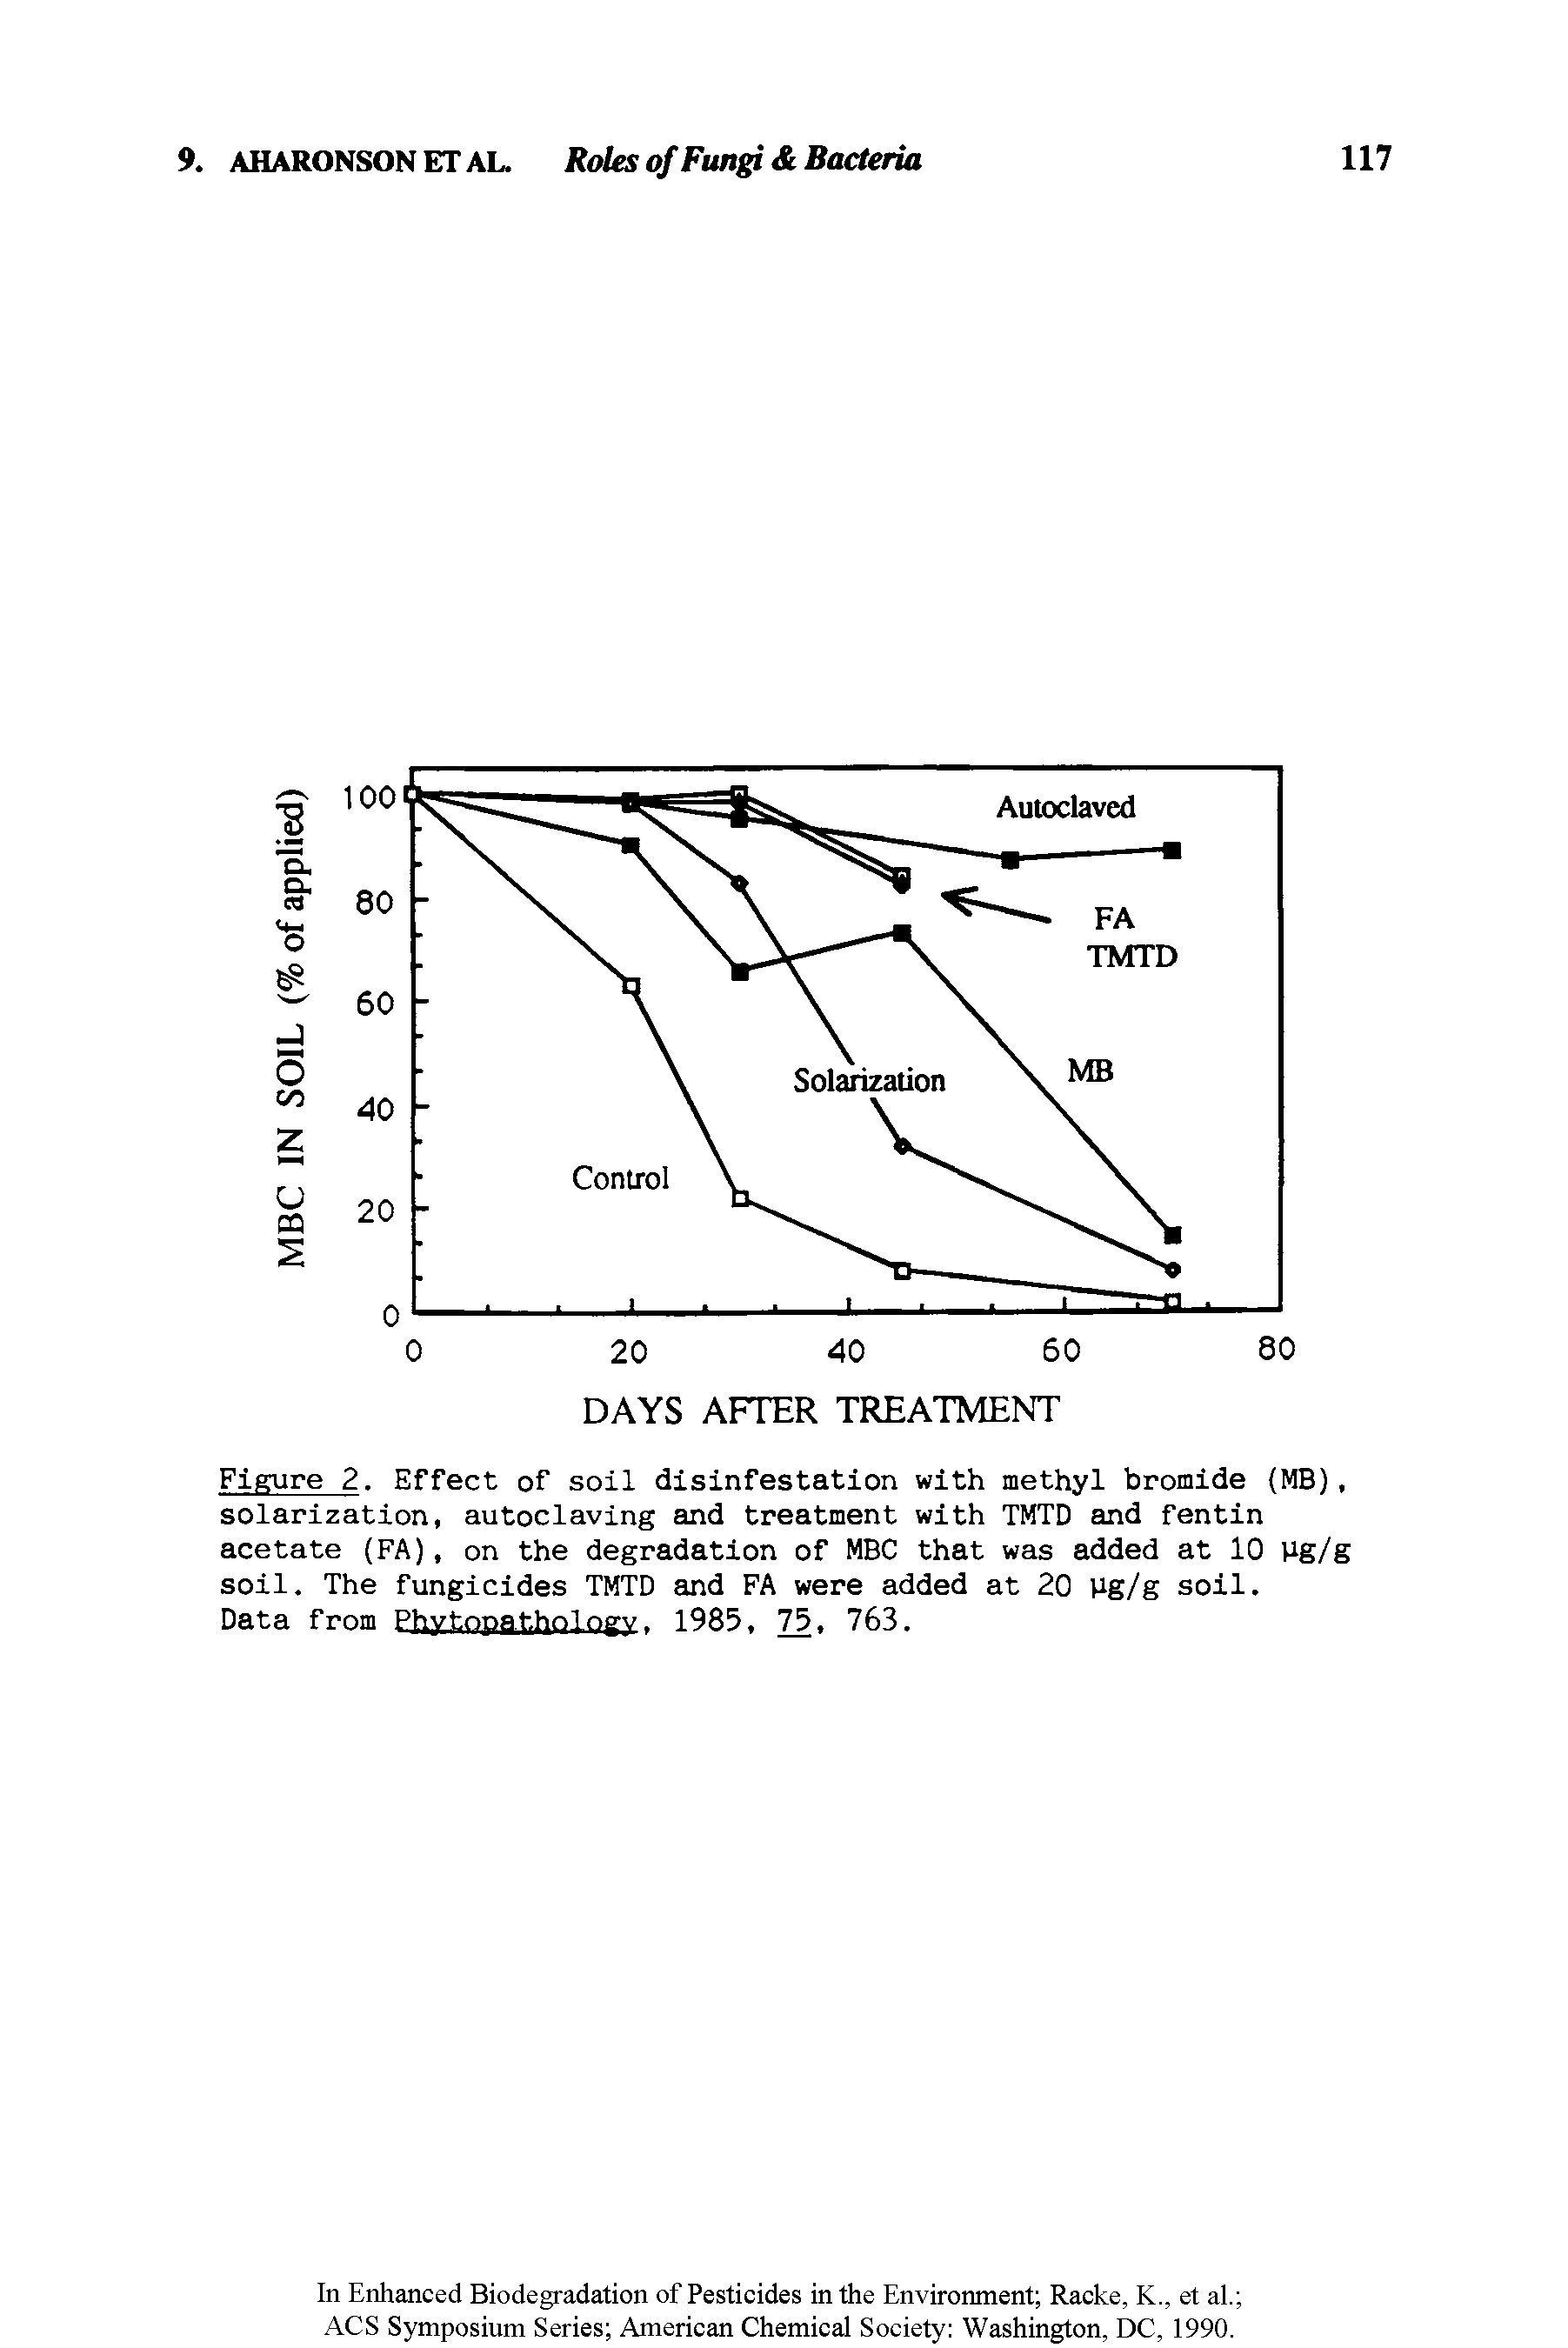 Figure 2. Effect of soil disinfestation with methyl bromide (MB), solarization, autoclaving and treatment with TMTD and fentin acetate (FA), on the degradation of MBC that was added at 10 Ug/g soil. The fungicides TMTD and FA were added at 20 Ug/g soil.